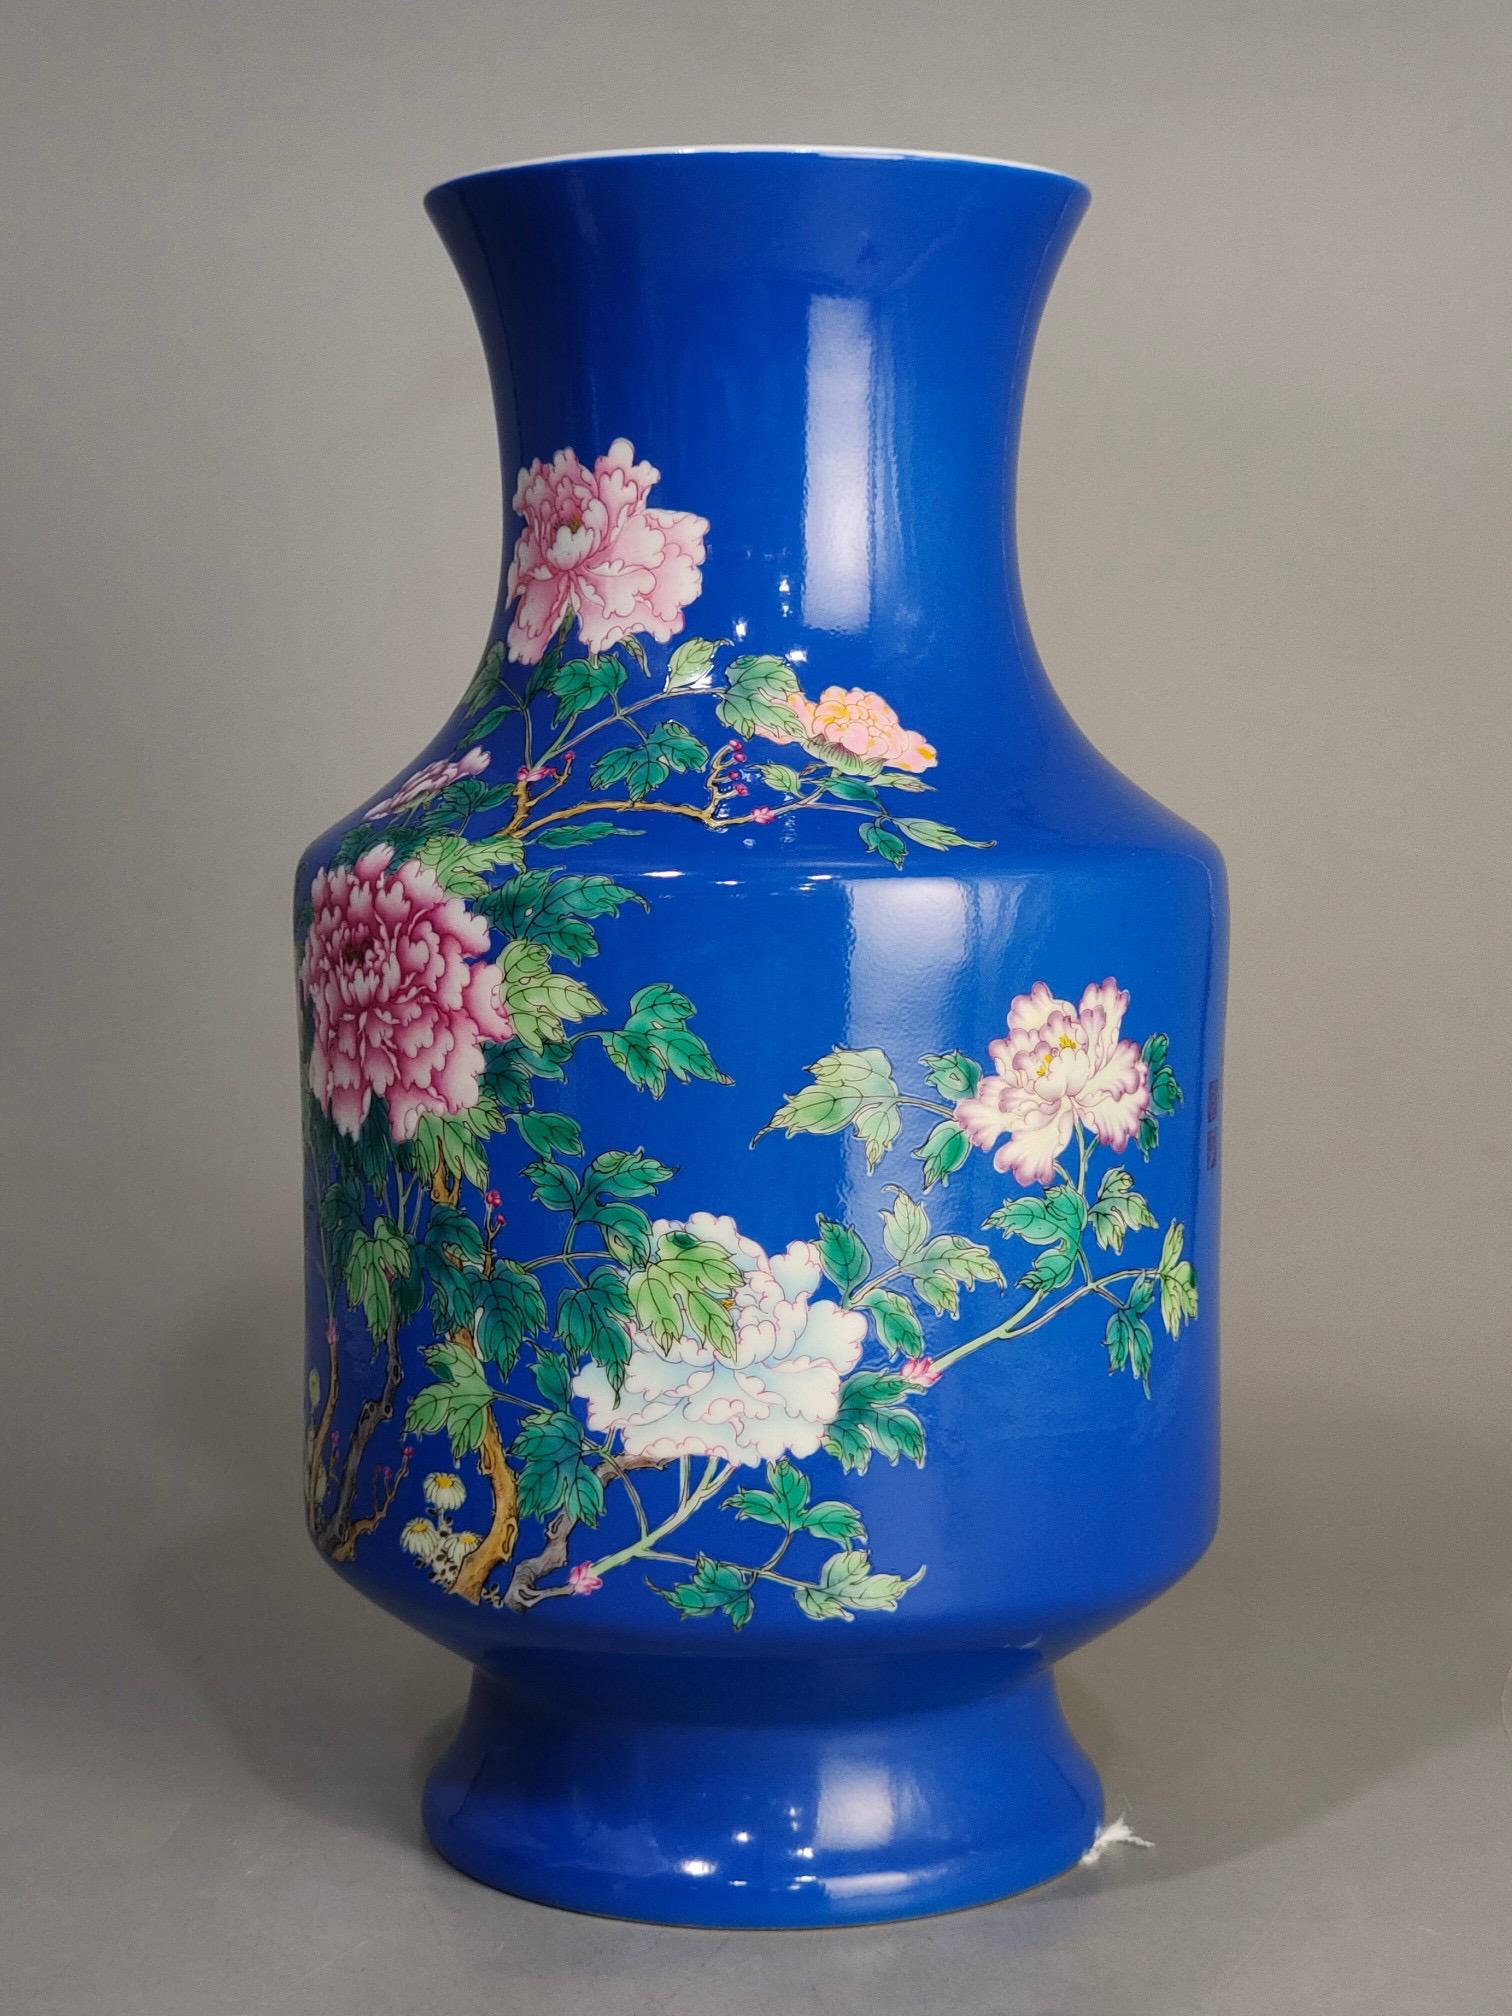 Chinese Handmade Porcelain Enamel Flowers Auspicious Poem Vase In Excellent Condition For Sale In 景德镇市, CN